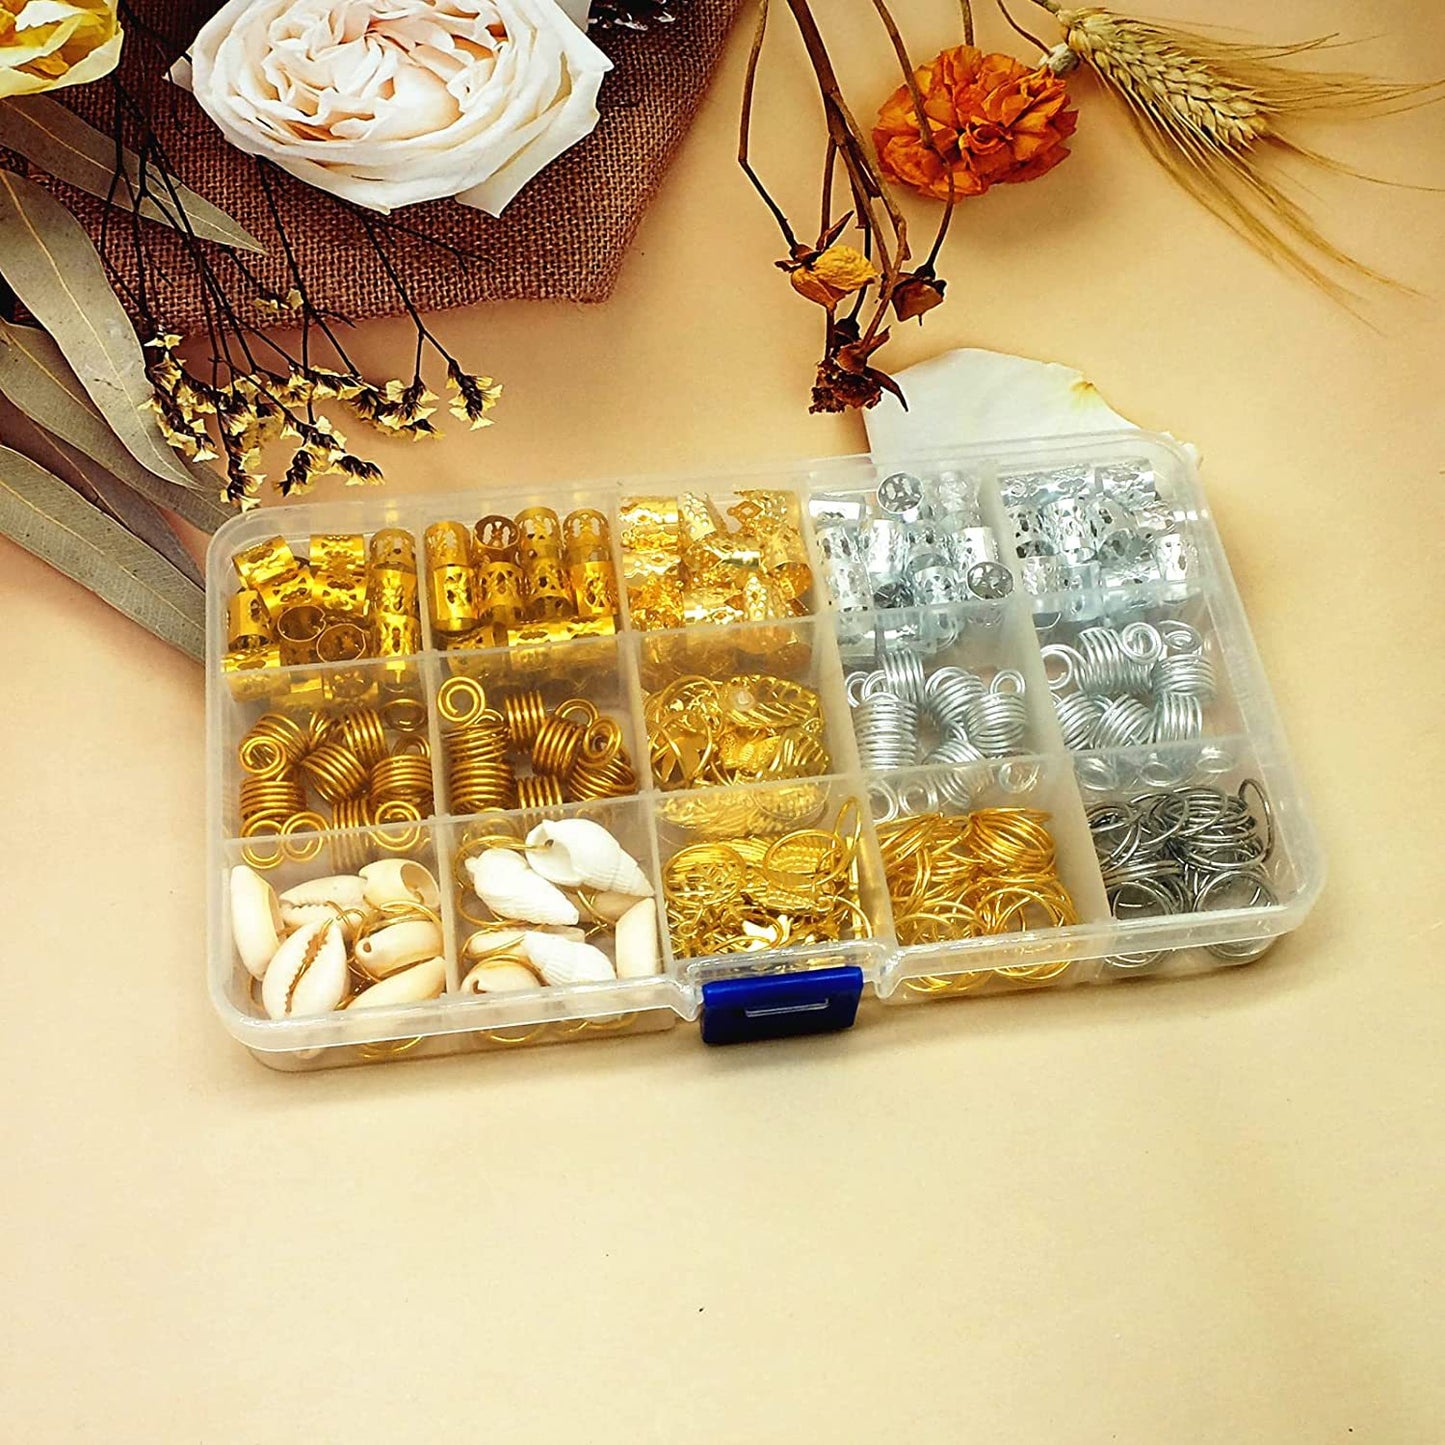 Bulk Hair Accessory for Women 230 Pcs Hair Jewelry for Braids Loc Jewelry Hair Decorations Leaf Pendant Hair Accessories Adjustable Spring Hair Charms Hair Rings for Braids Wholesale